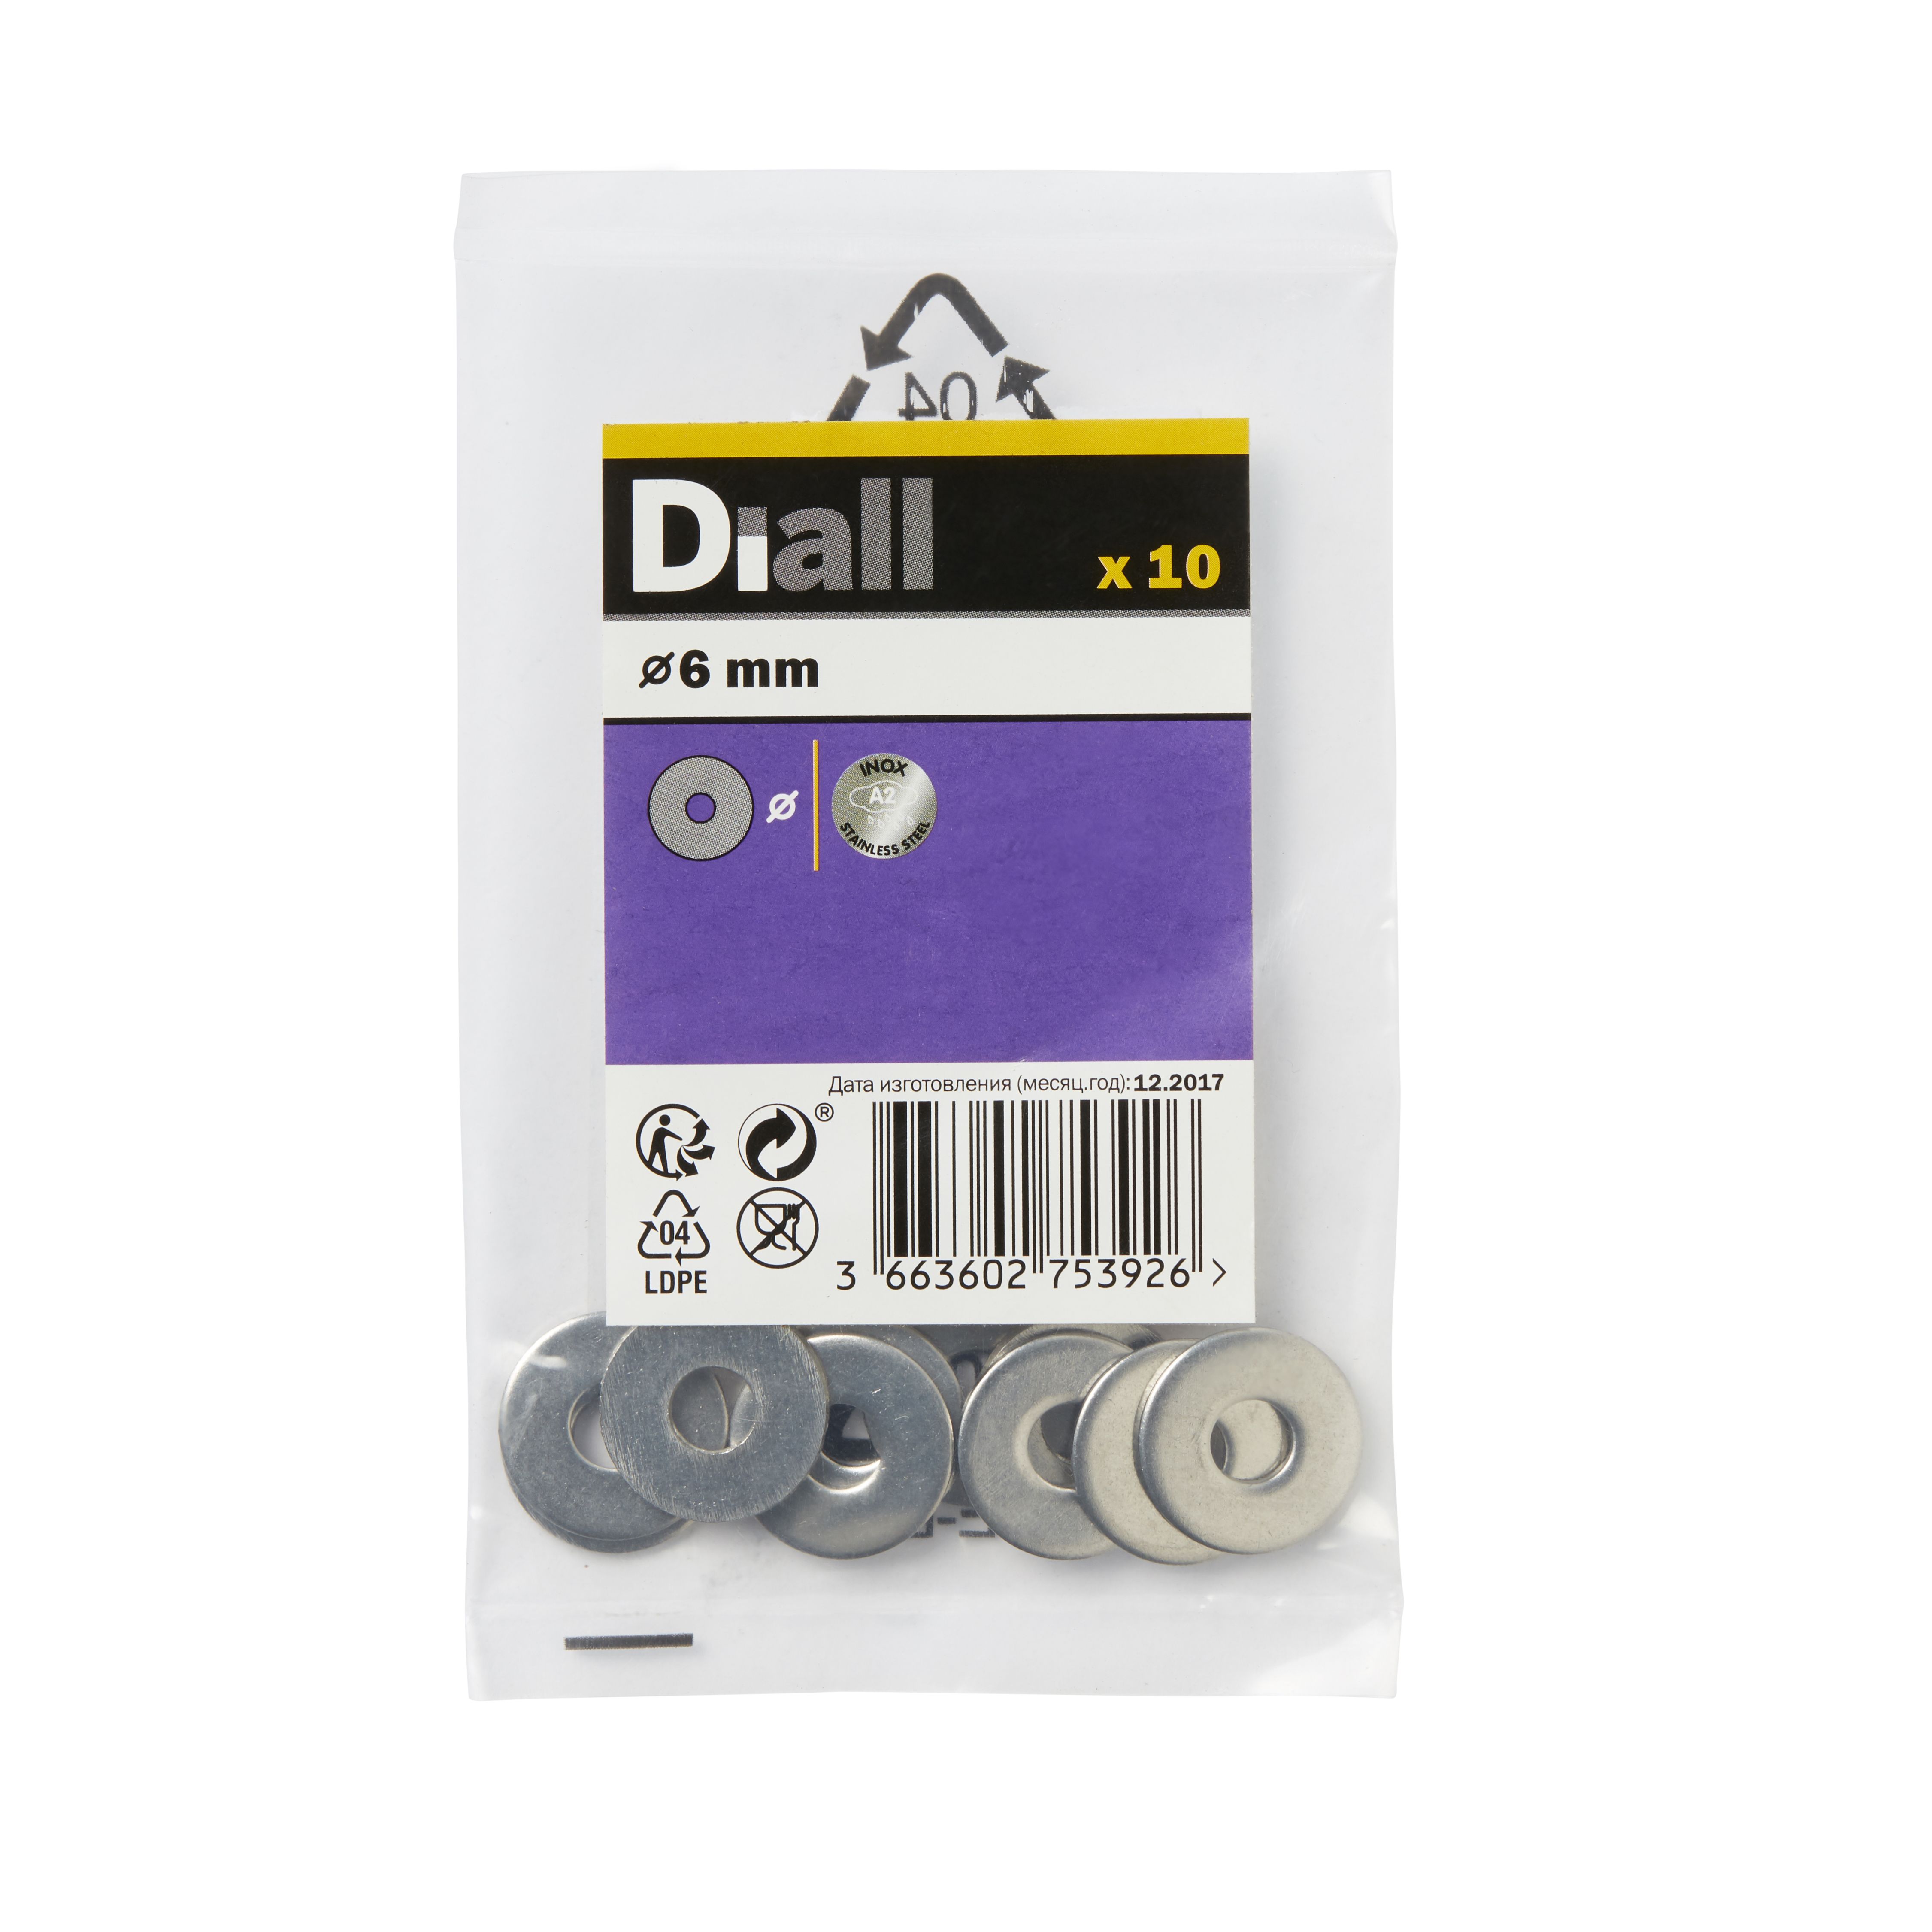 https://media.diy.com/is/image/Kingfisher/diall-m6-stainless-steel-large-flat-washer-dia-6mm-pack-of-10~3663602753926_01bq?$MOB_PREV$&$width=618&$height=618